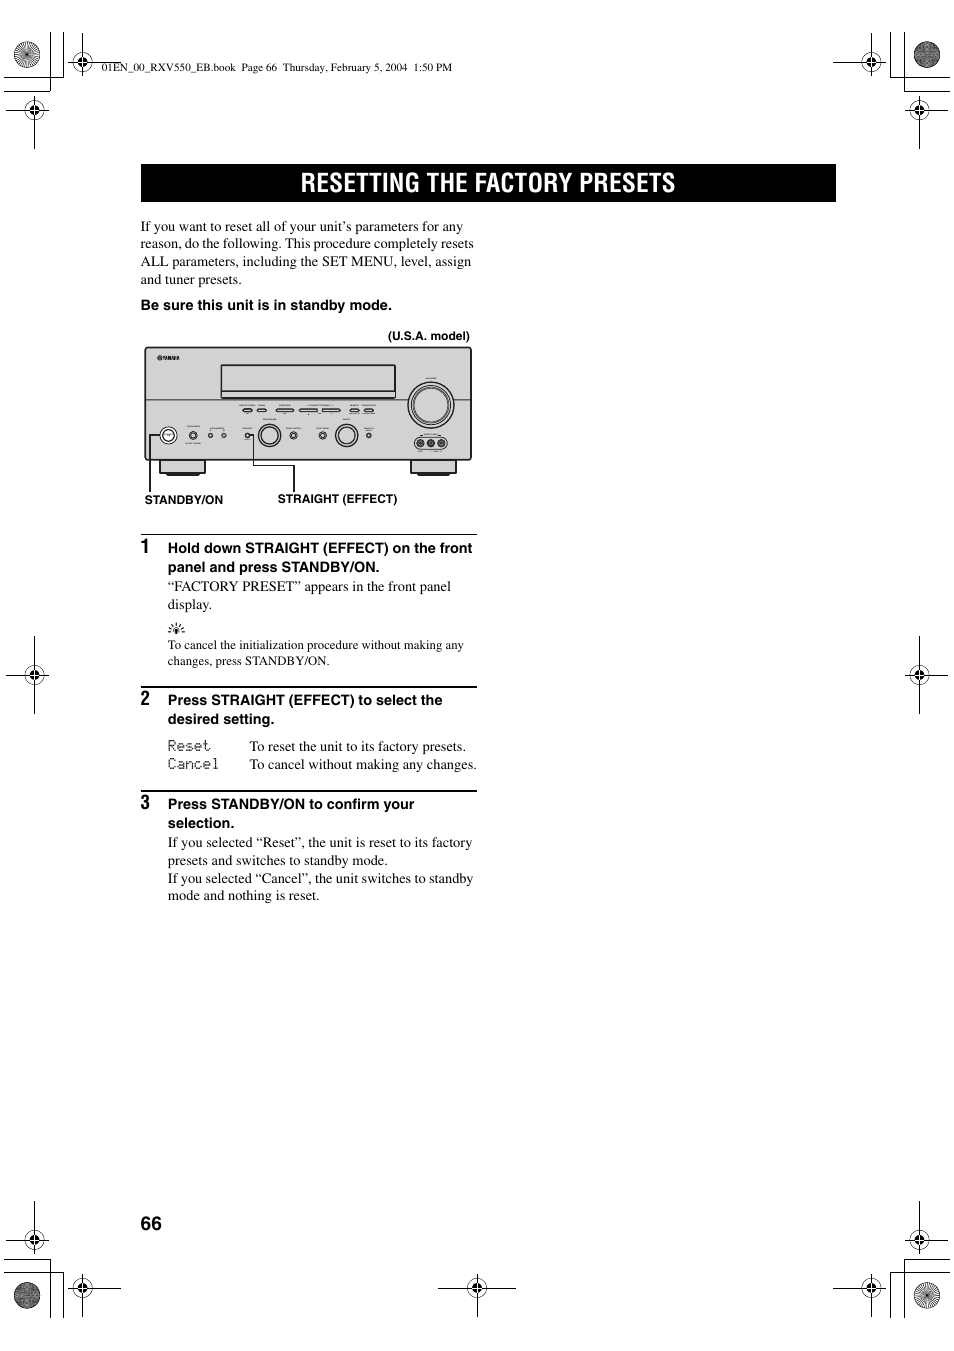 Resetting the factory presets | Yamaha RX-V550 User Manual | Page 68 / 78 |  Original mode